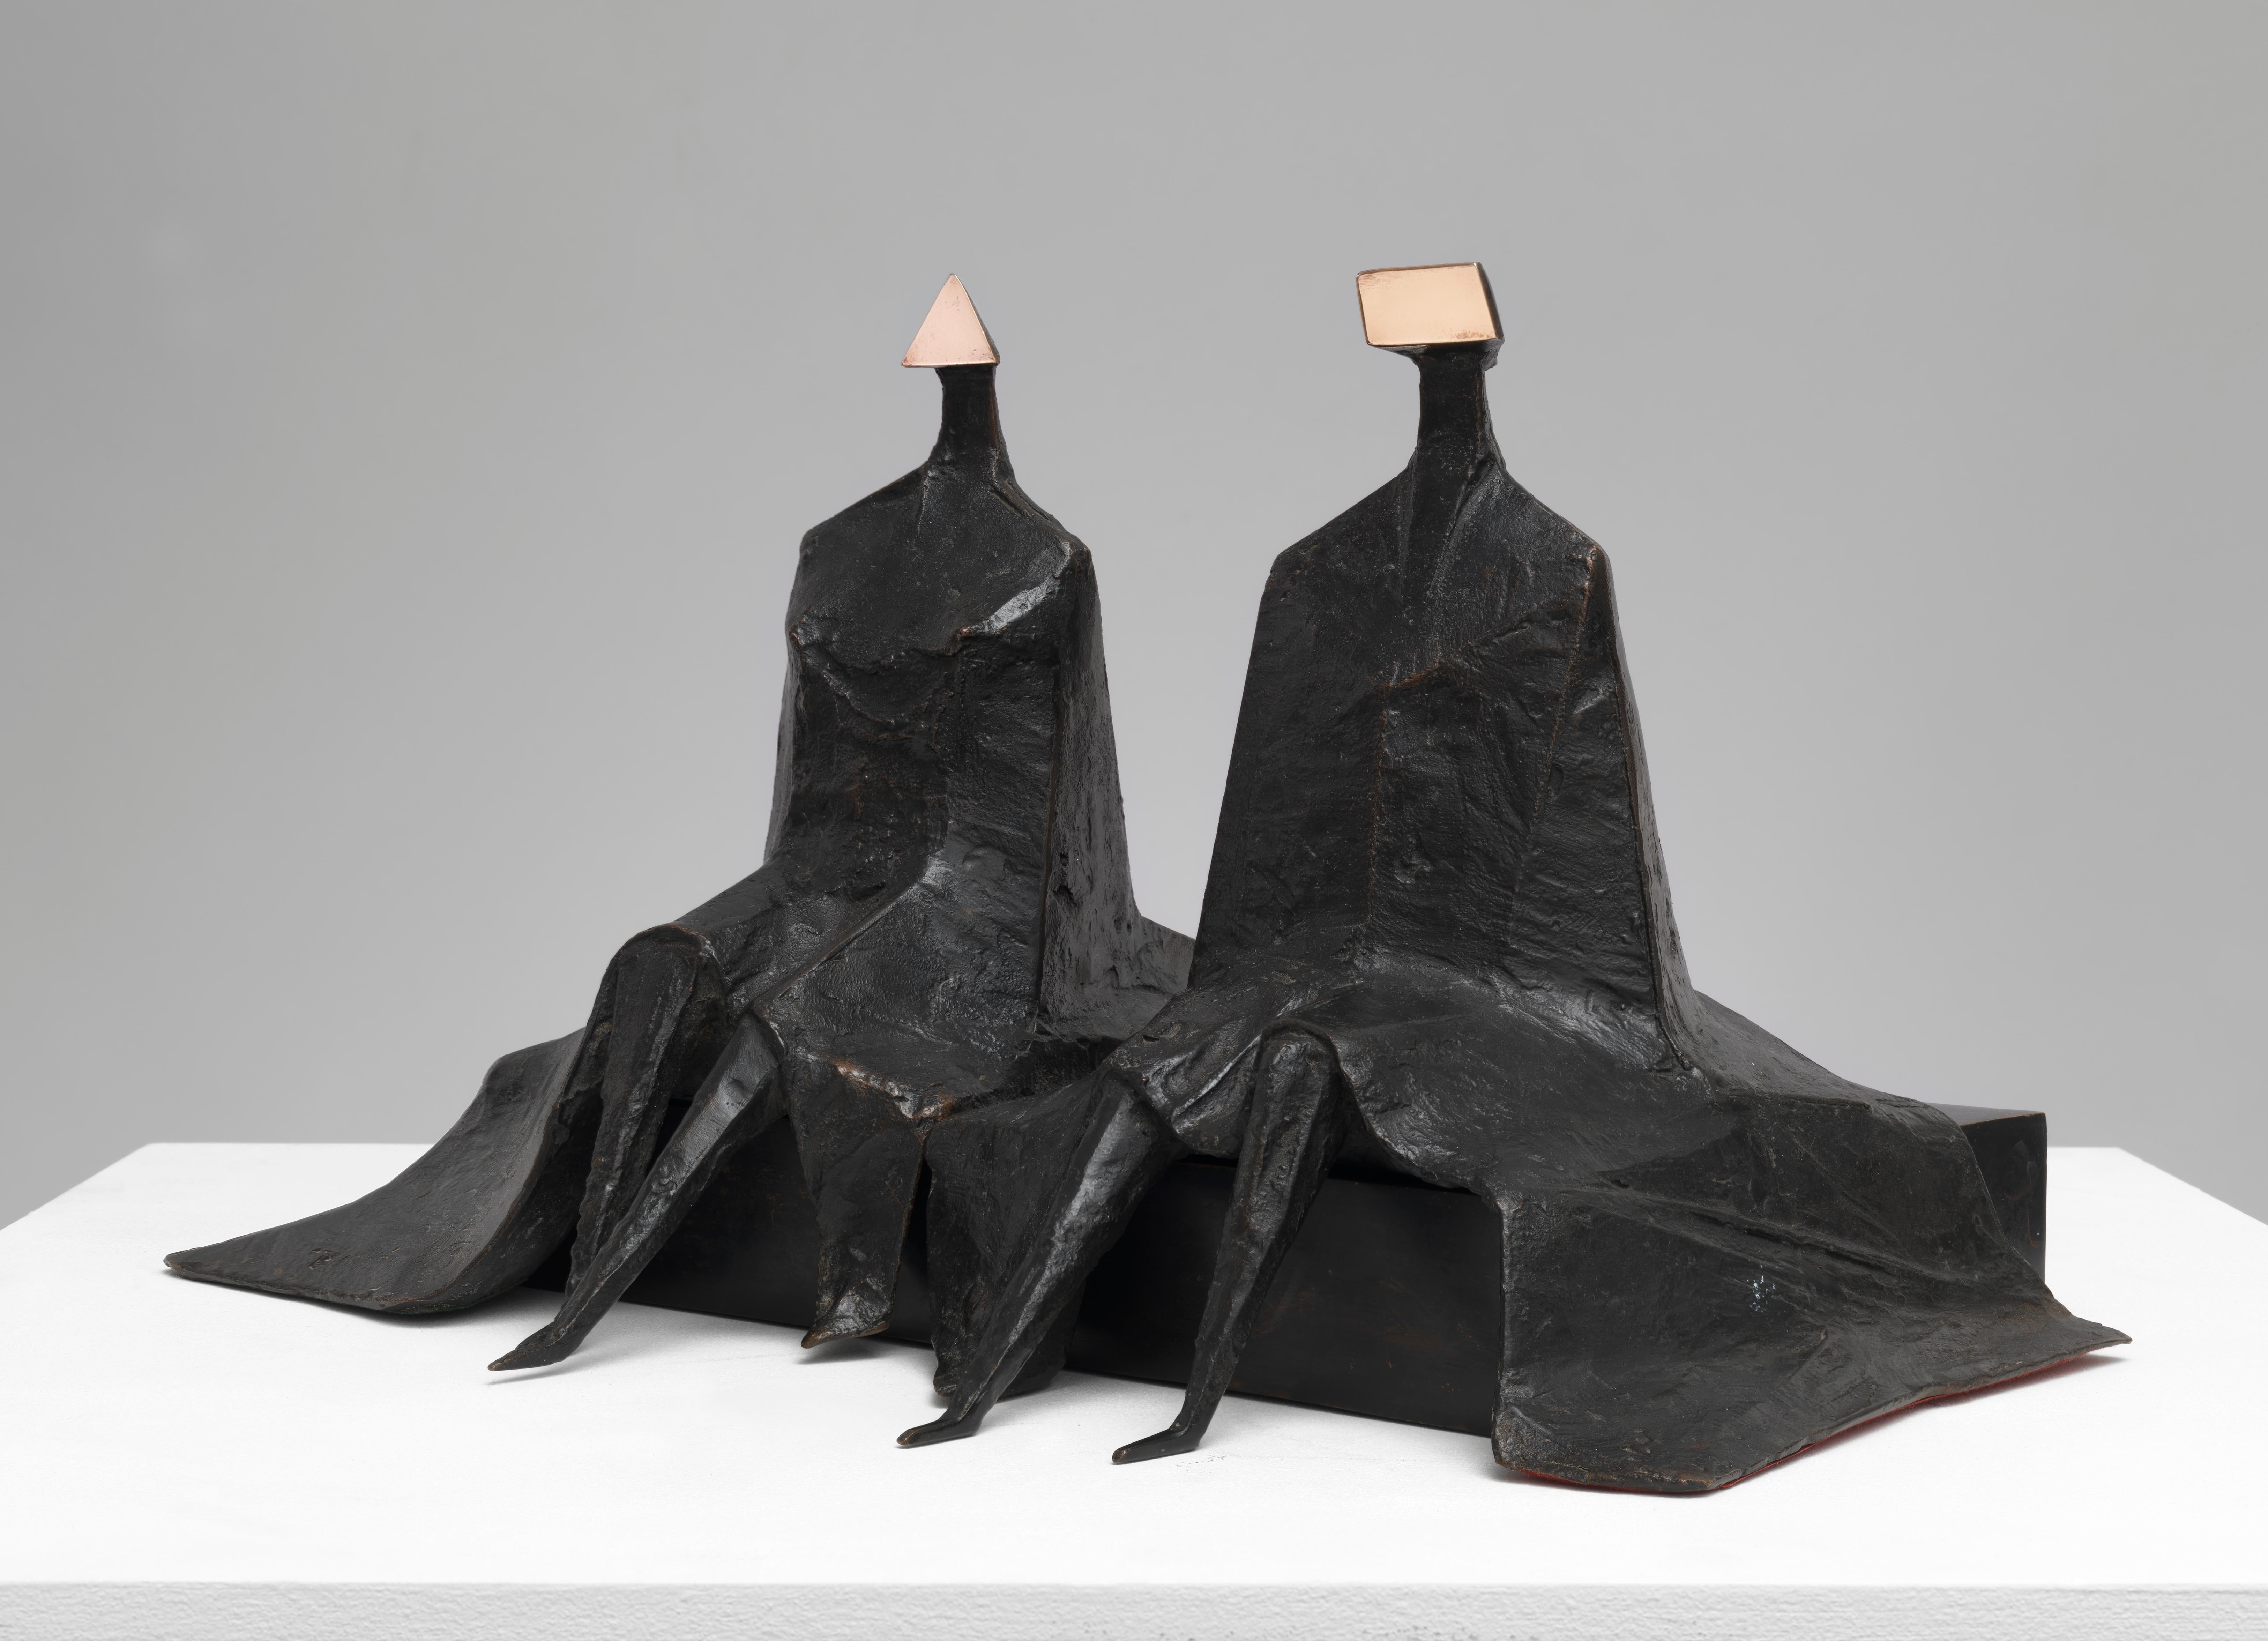 Sitting Figures in Robes I - 20th Century, Bronze, Sculpture by Lynn Chadwick